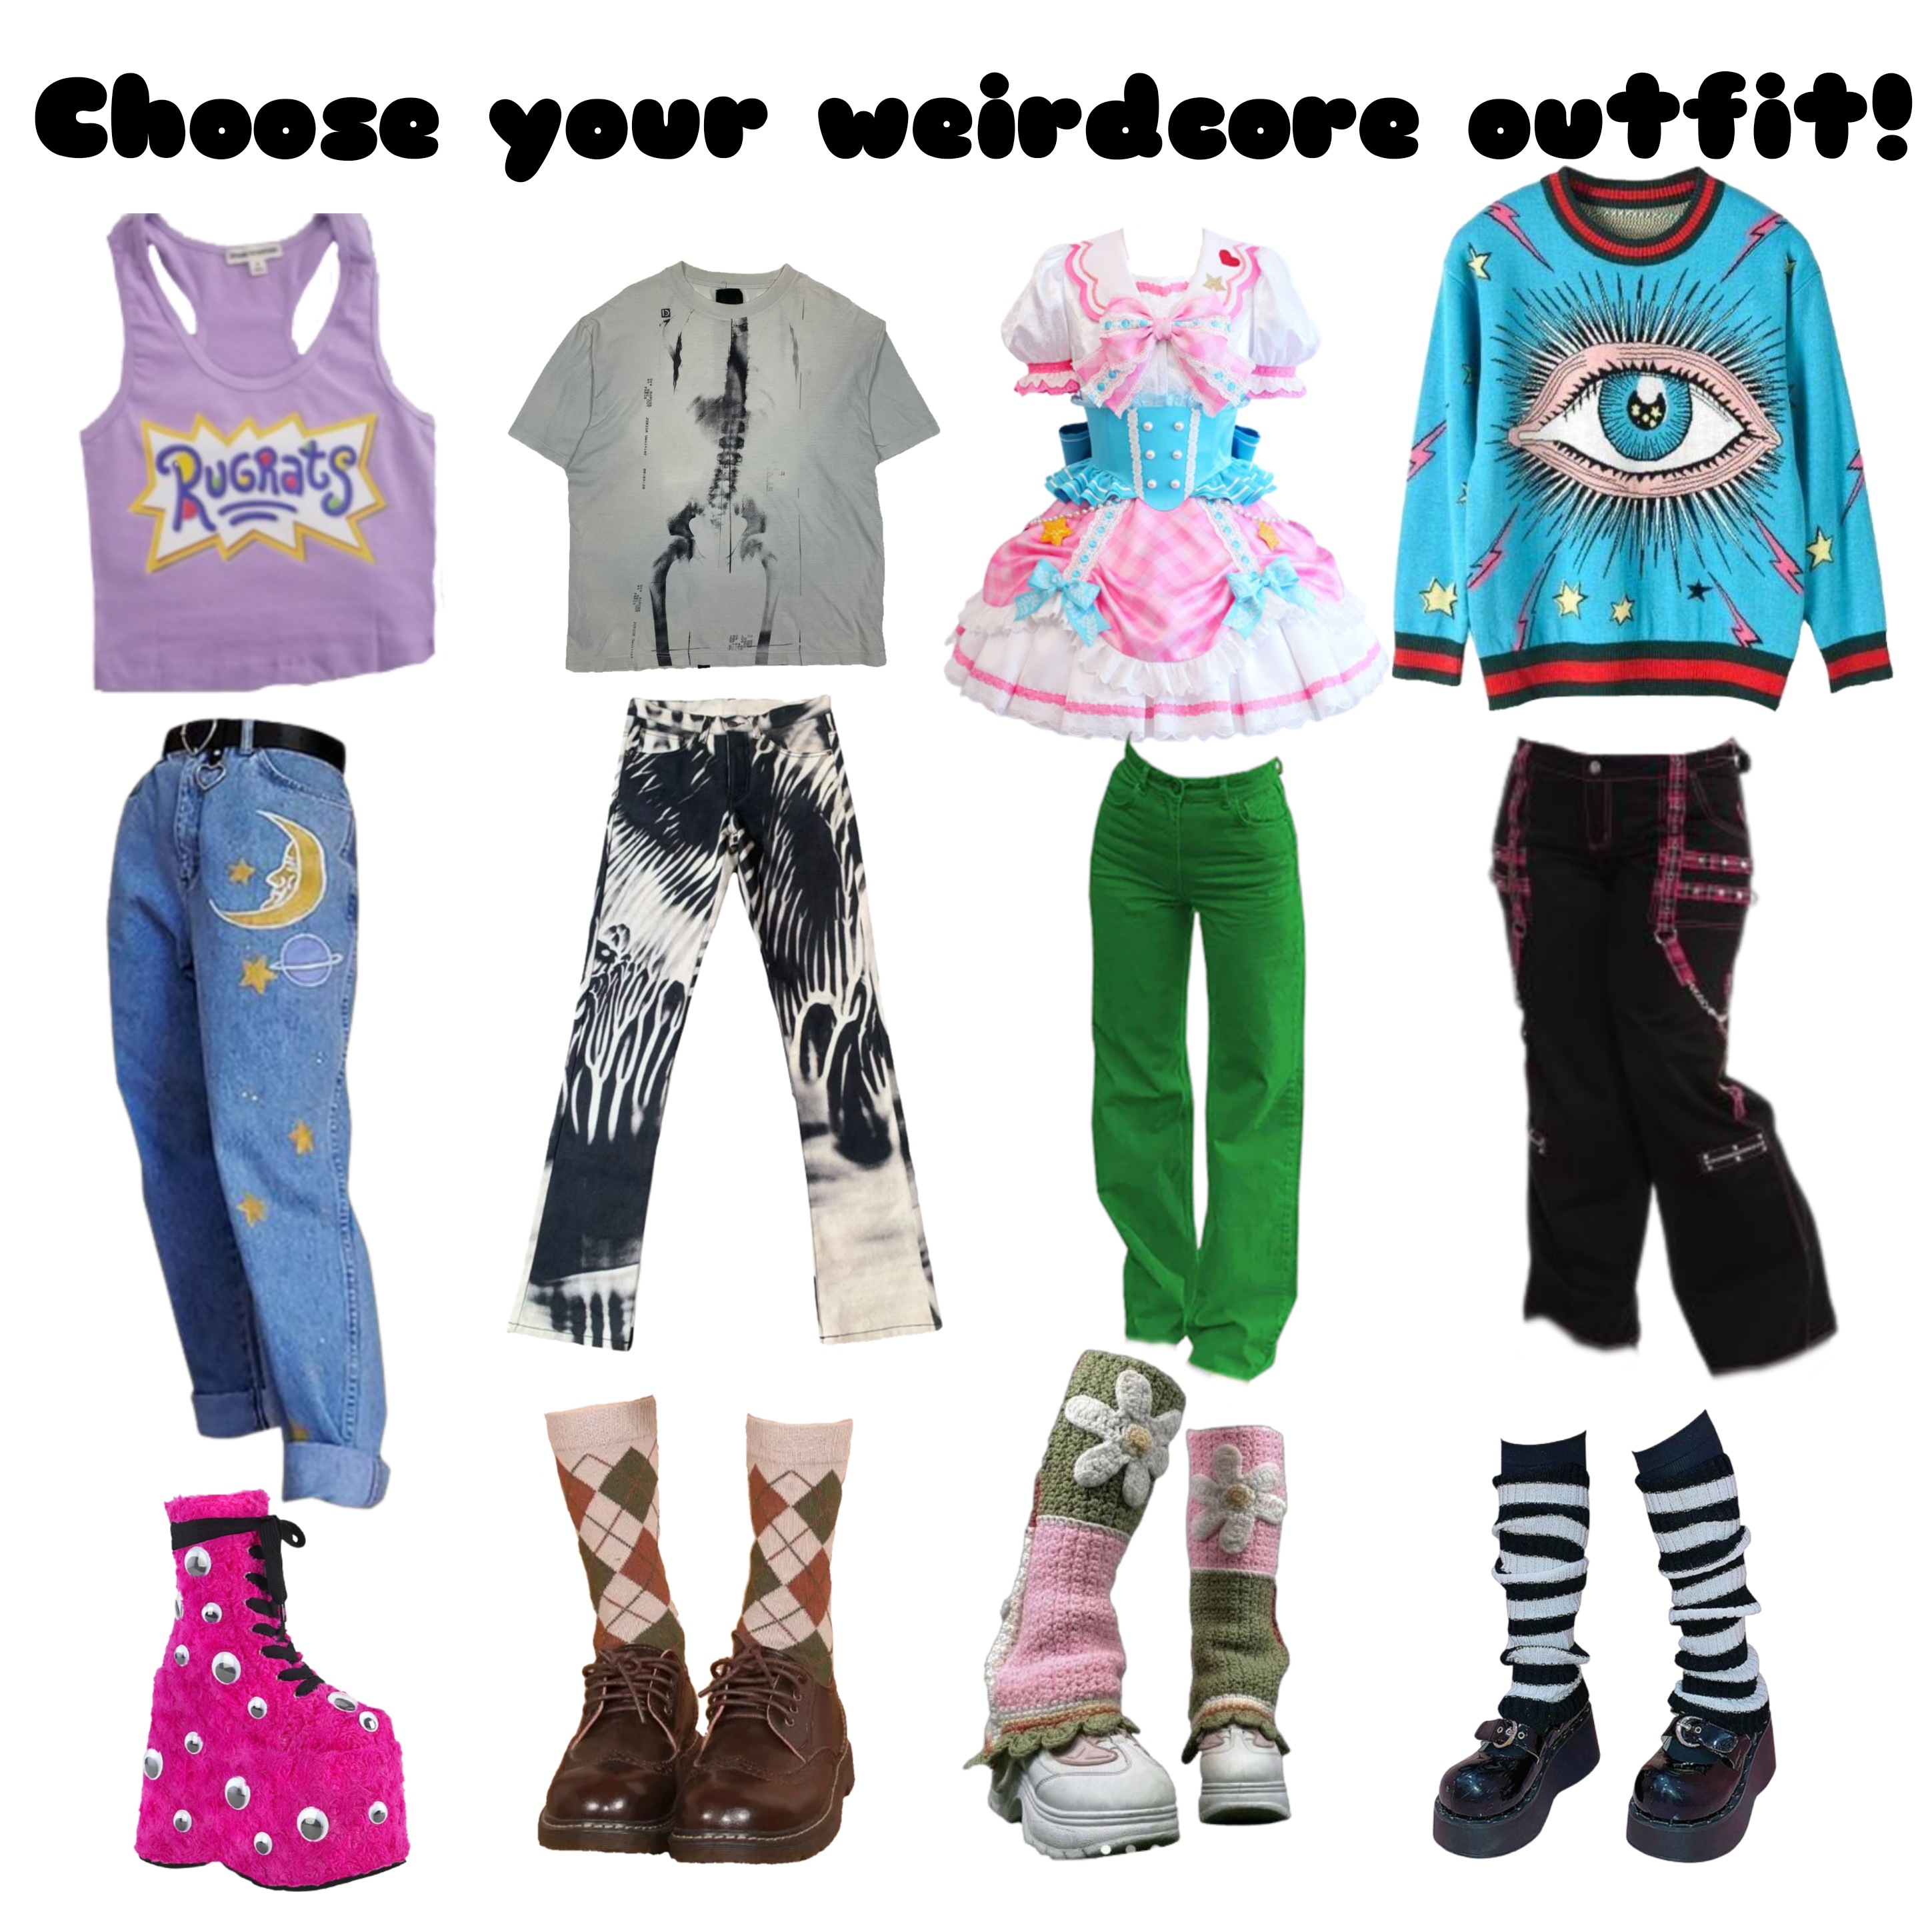 weirdcore Outfit